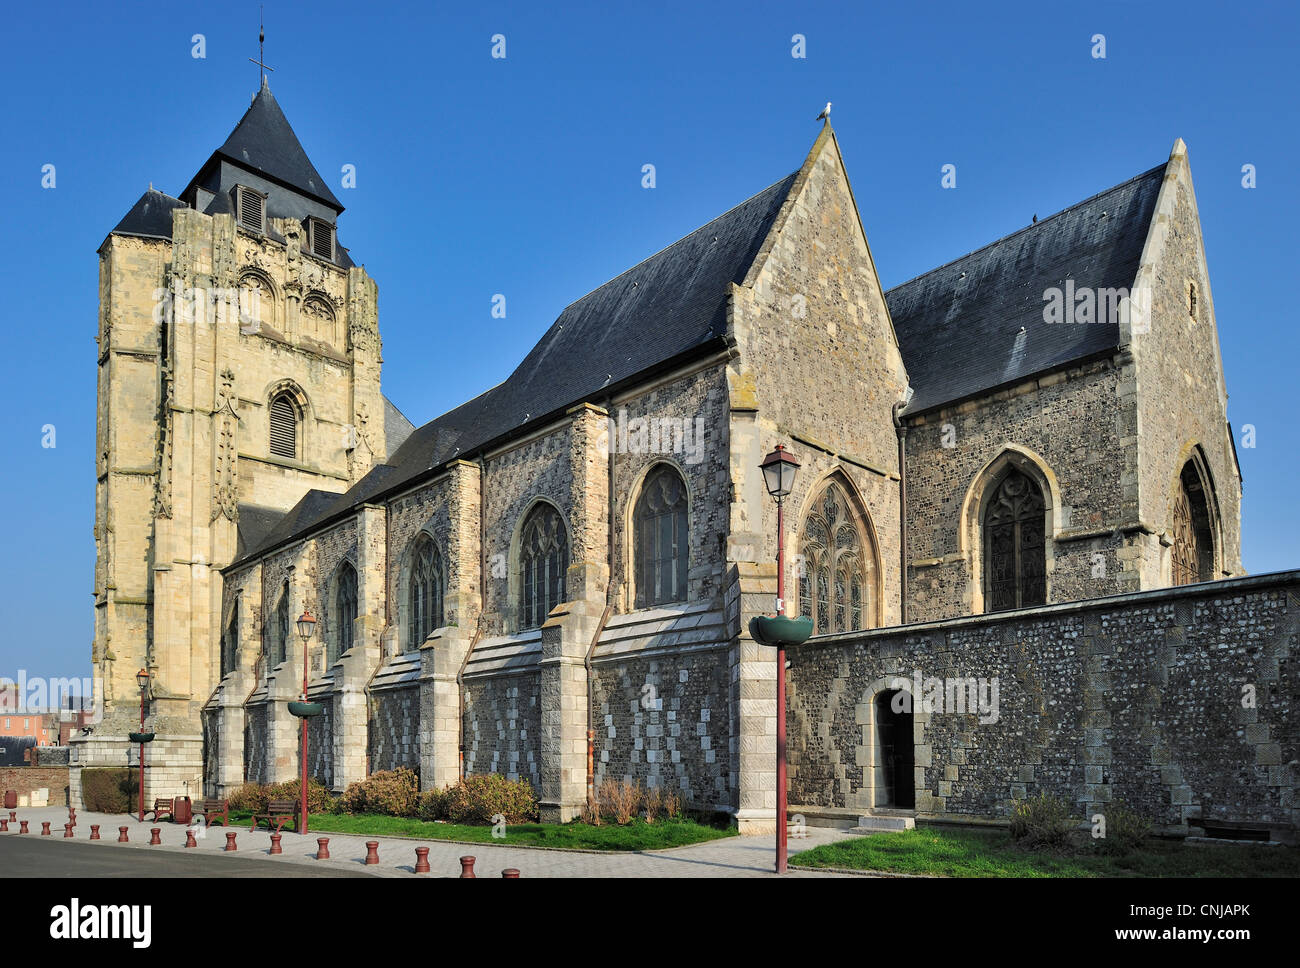 The Saint Jacques church made of flint and sandstone at Le Tréport, Upper Normandy, Seine-Maritime, France Stock Photo